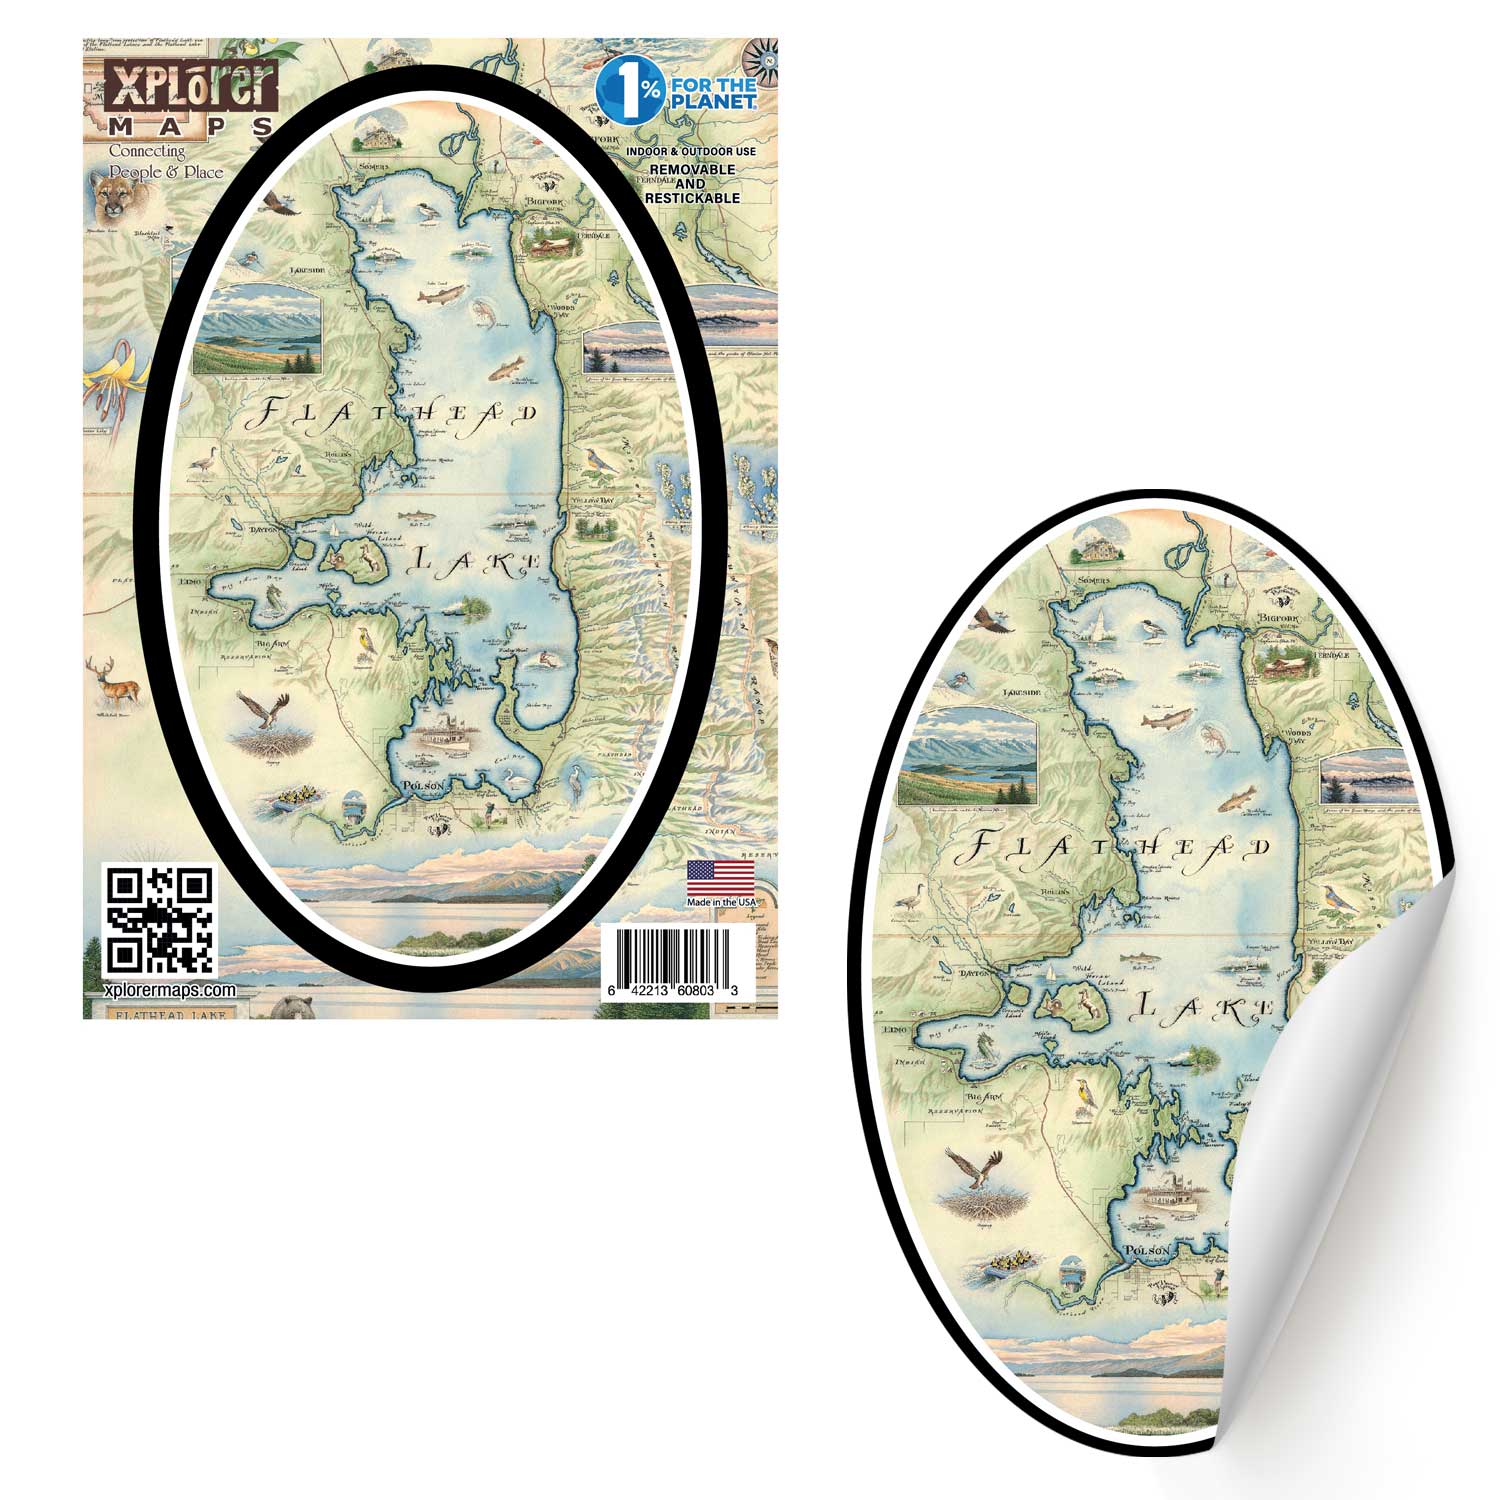 Montana's Flathead Lake Map Sticker by Xplorer Maps. Features Golfing, Steamboat, Rafting, birds, eagles, Osprey, Bears, forest, water, deer, mountain lion, fish, Cherry Blossoms, and flowers like Glacier Lilies and Lady Slippers. Cities and landmarks such as Woods Bay, Wild Horse Island, Finley Point, and Big Arm are noted. 